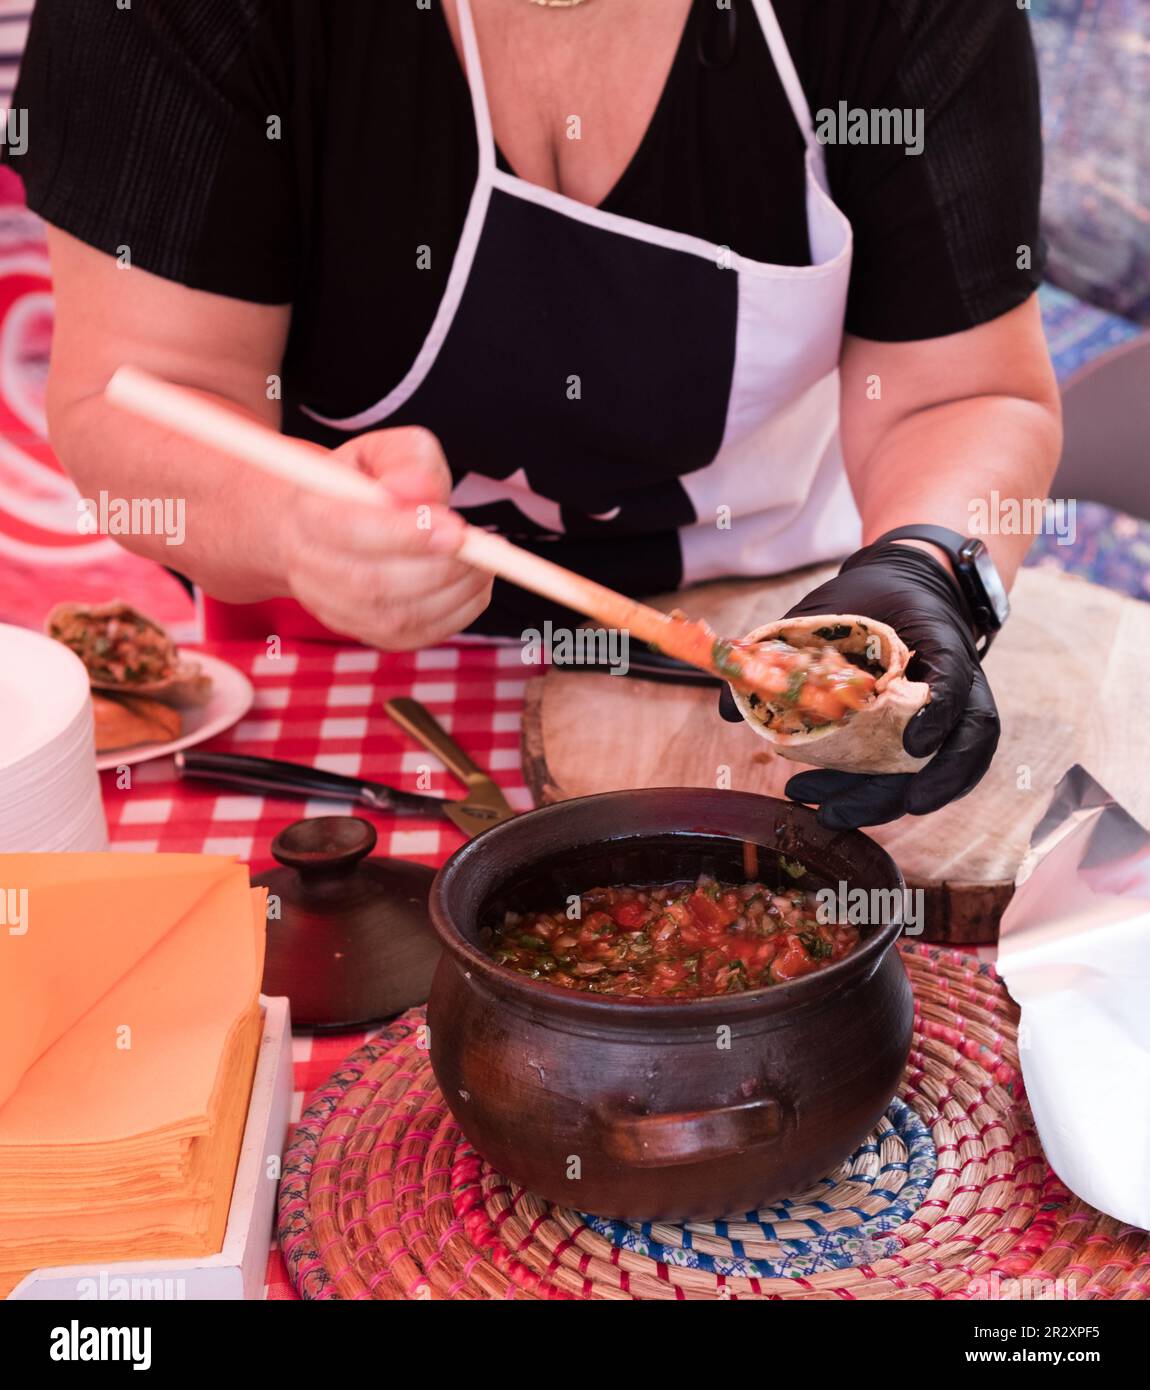 Woman making fresh whole wheat chicken empanadas at a food market in The Netherlands. Traditional Chilean savory pastry. Stock Photo